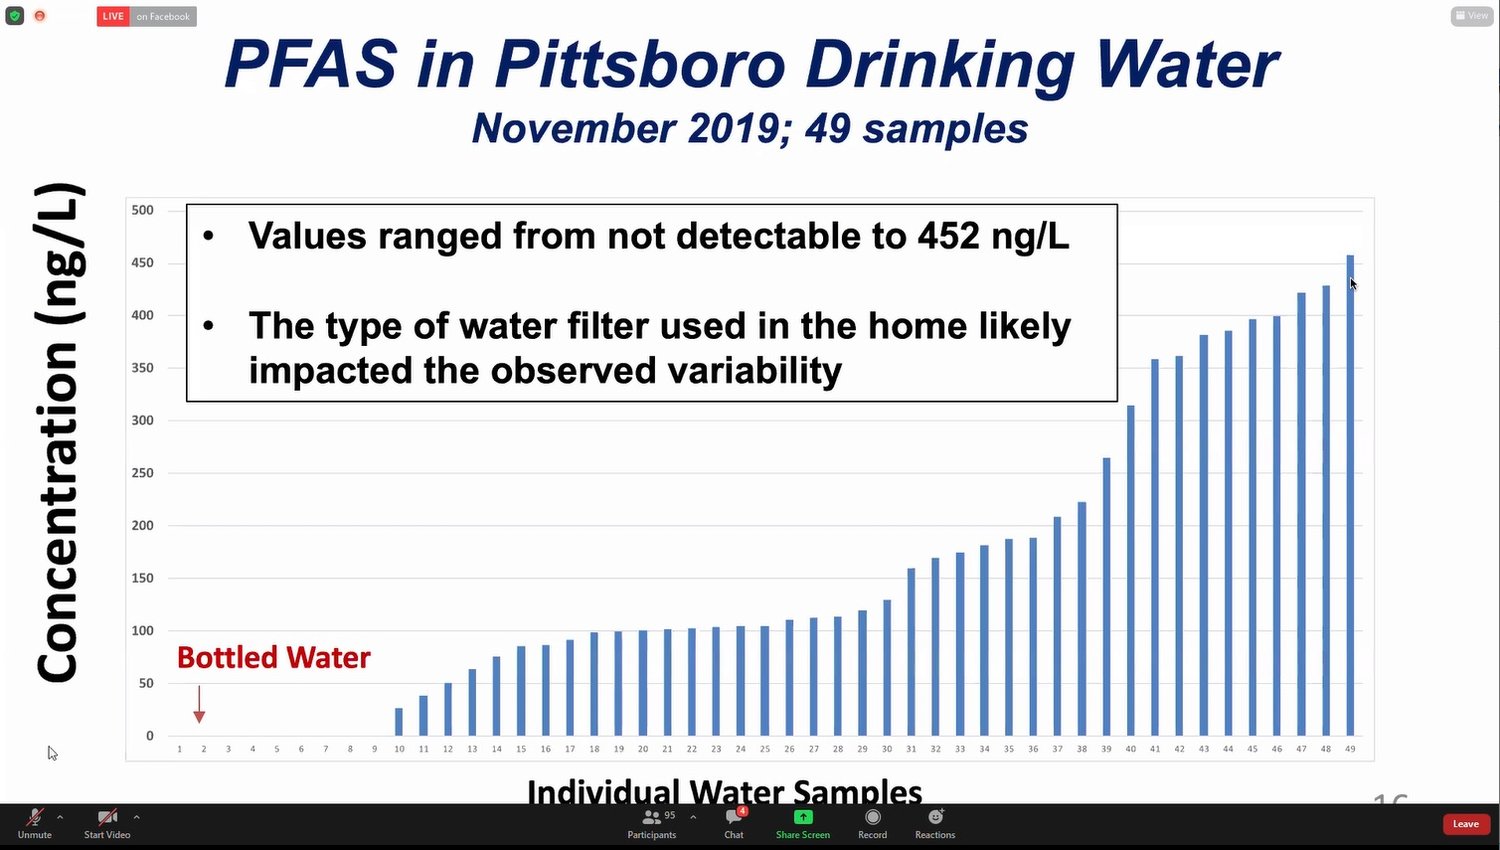 PFAS level in Pittsboro drinking water from 49 samples — 70 ng/L is the EPA health advisory maximum.